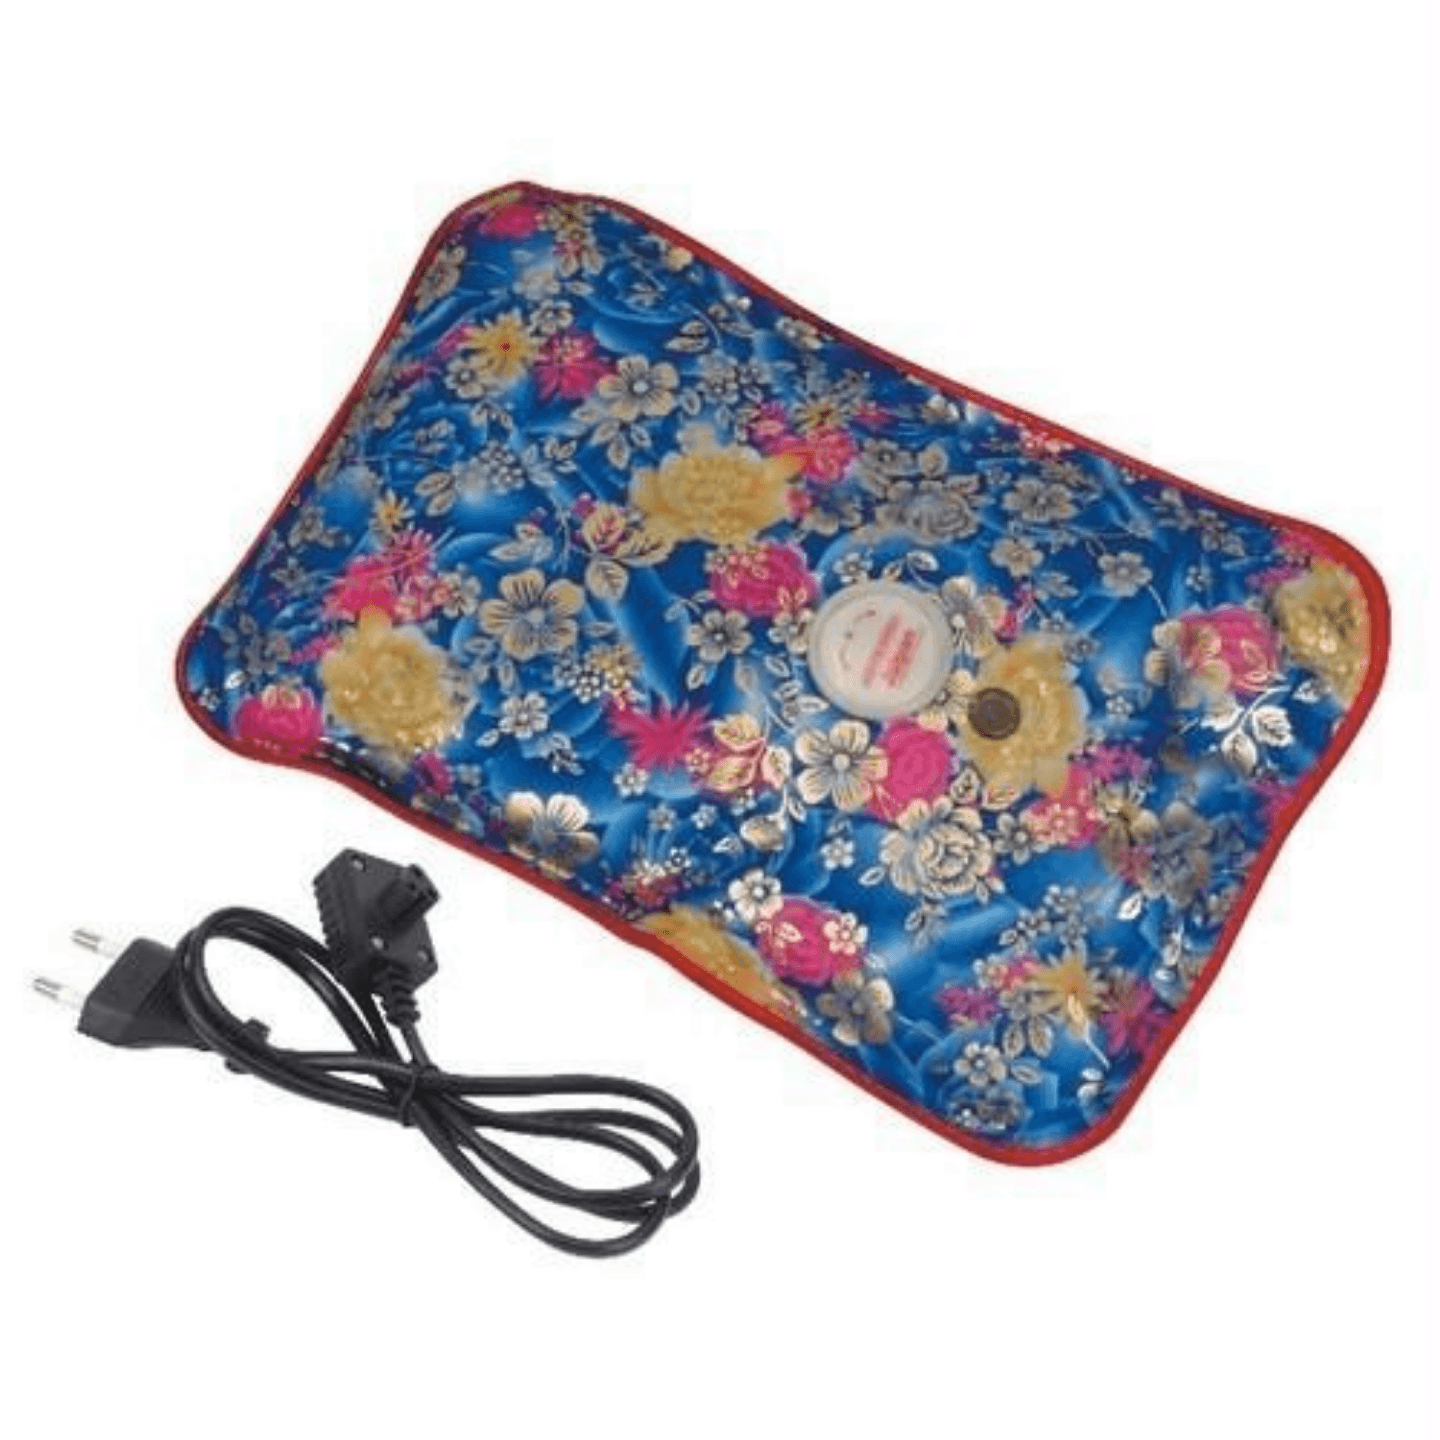 JonPrix Rechagerable Electric Heating Gel Pad Hot Water Bags For JointMuscle Pains Size Length 25Cm Width 18Cm